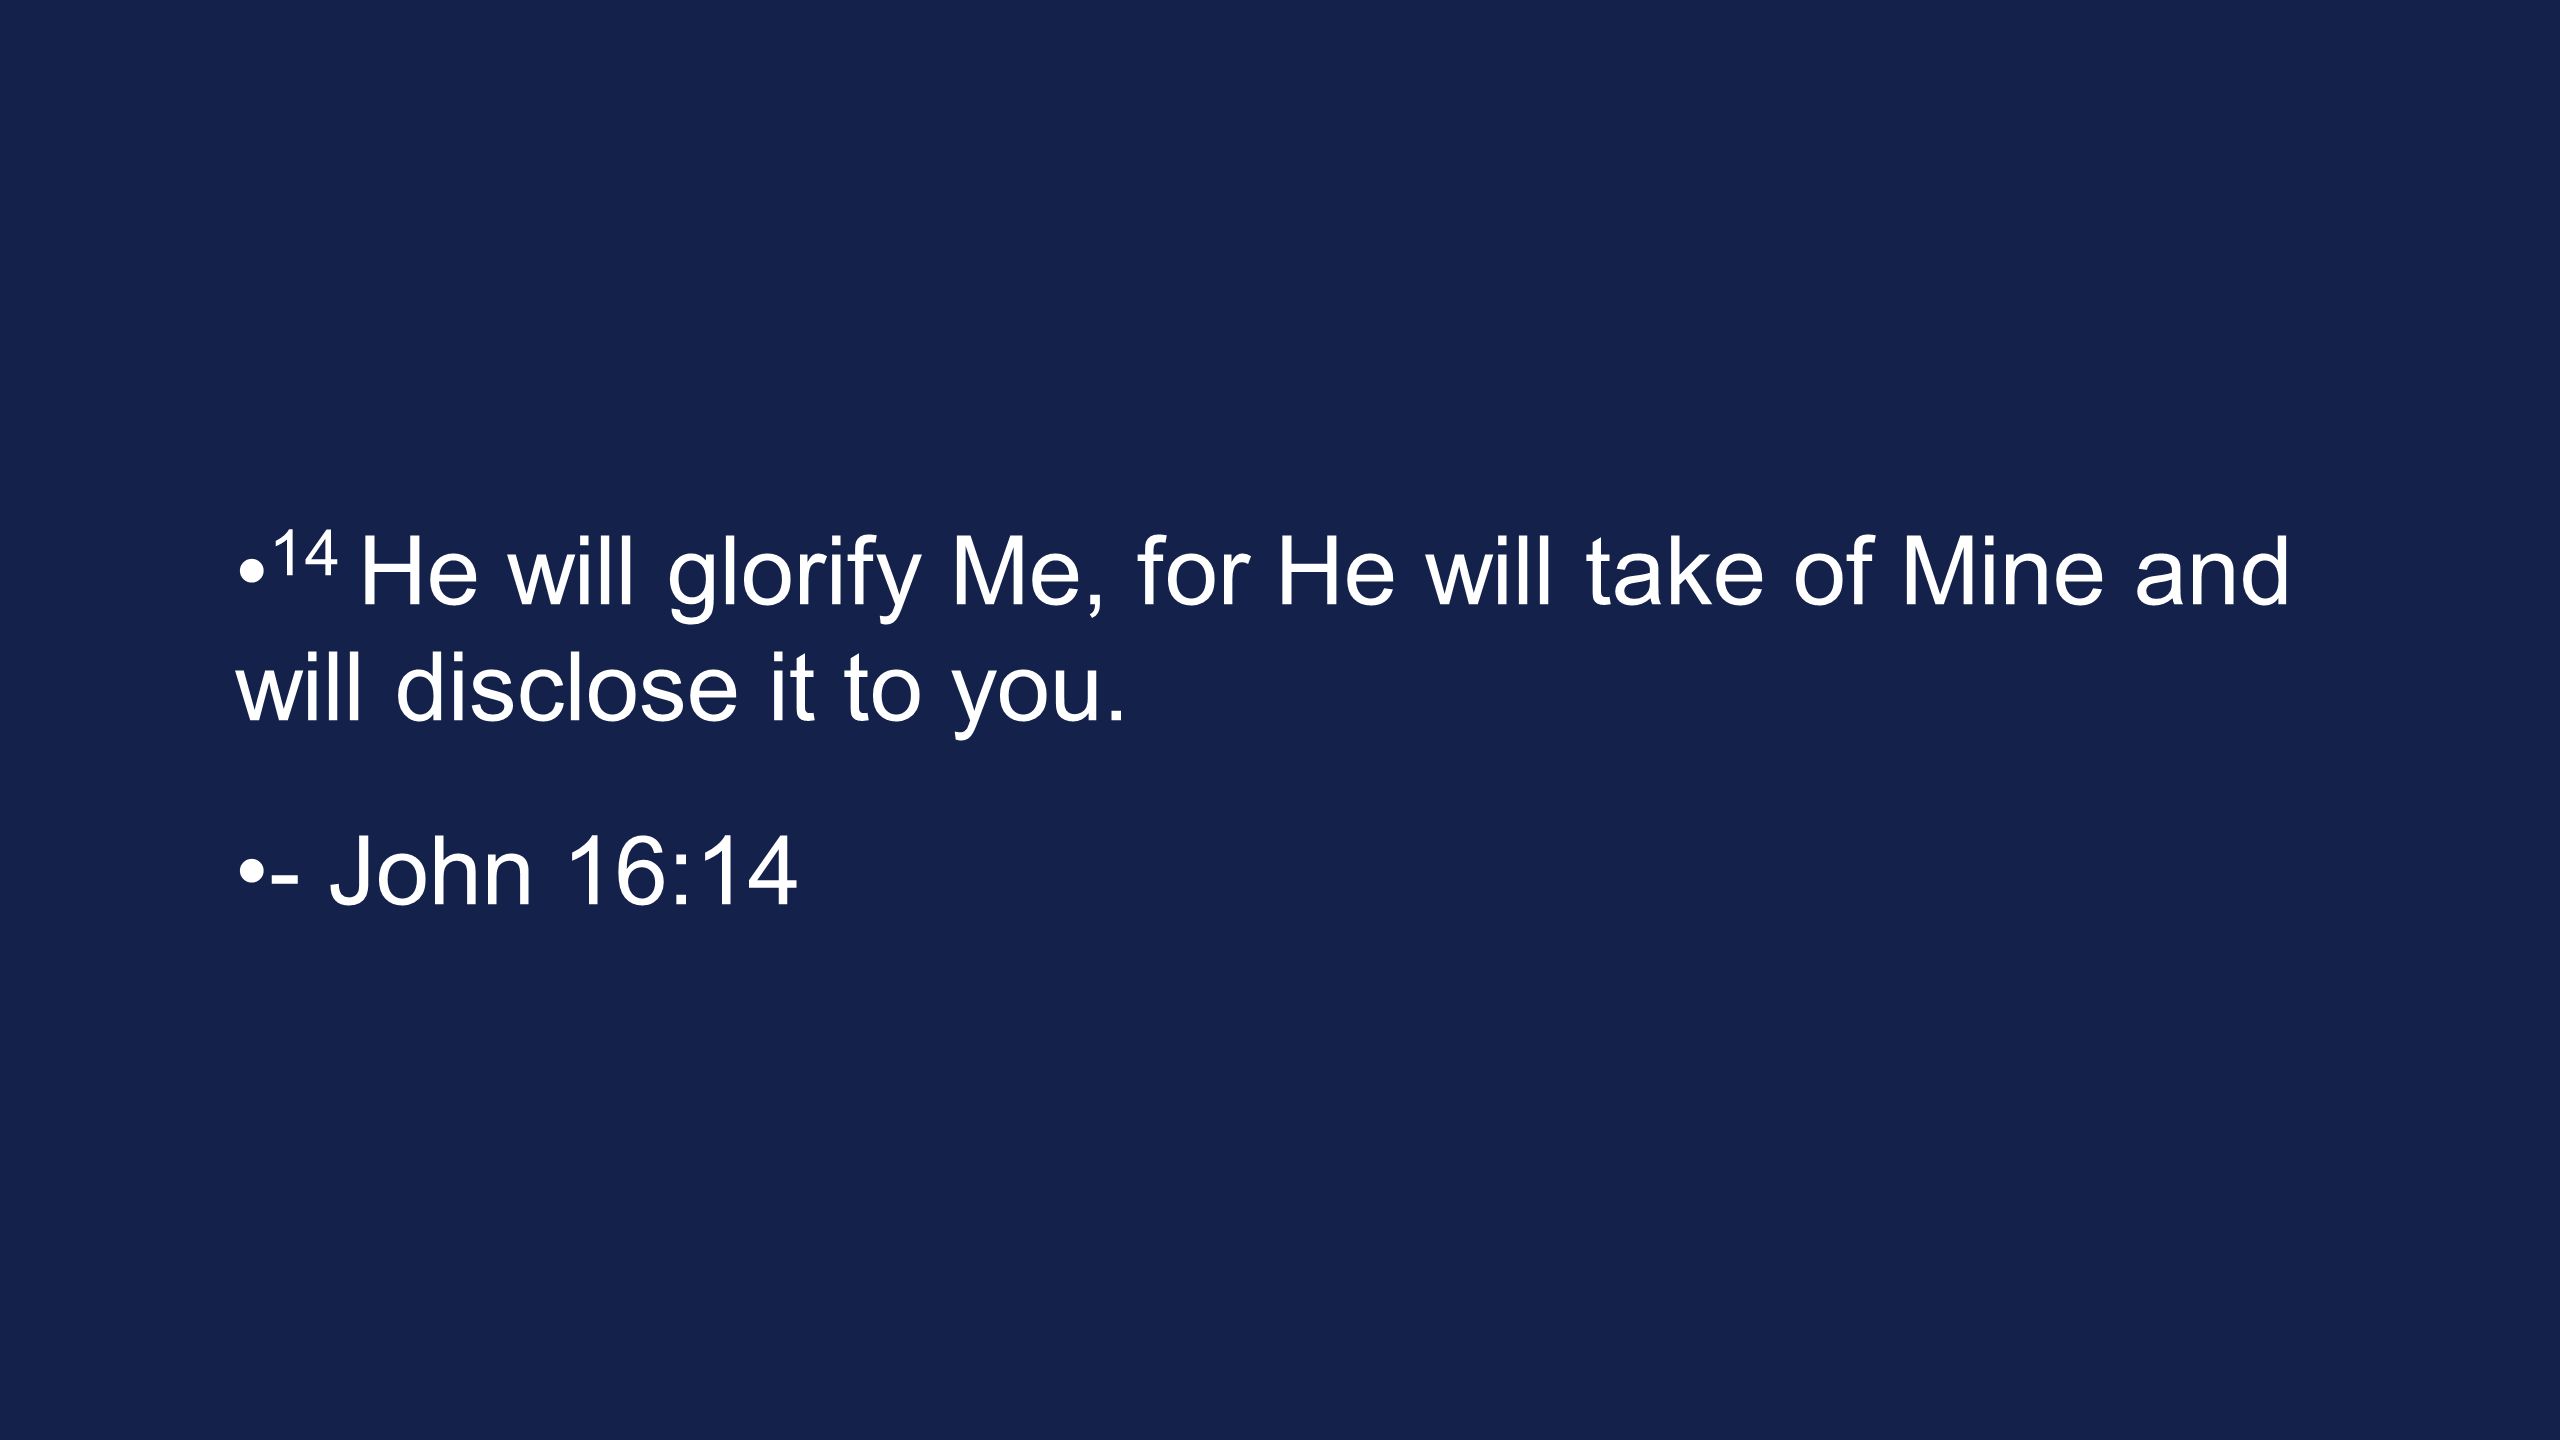 14 He will glorify Me, for He will take of Mine and will disclose it to you. - John 16:14